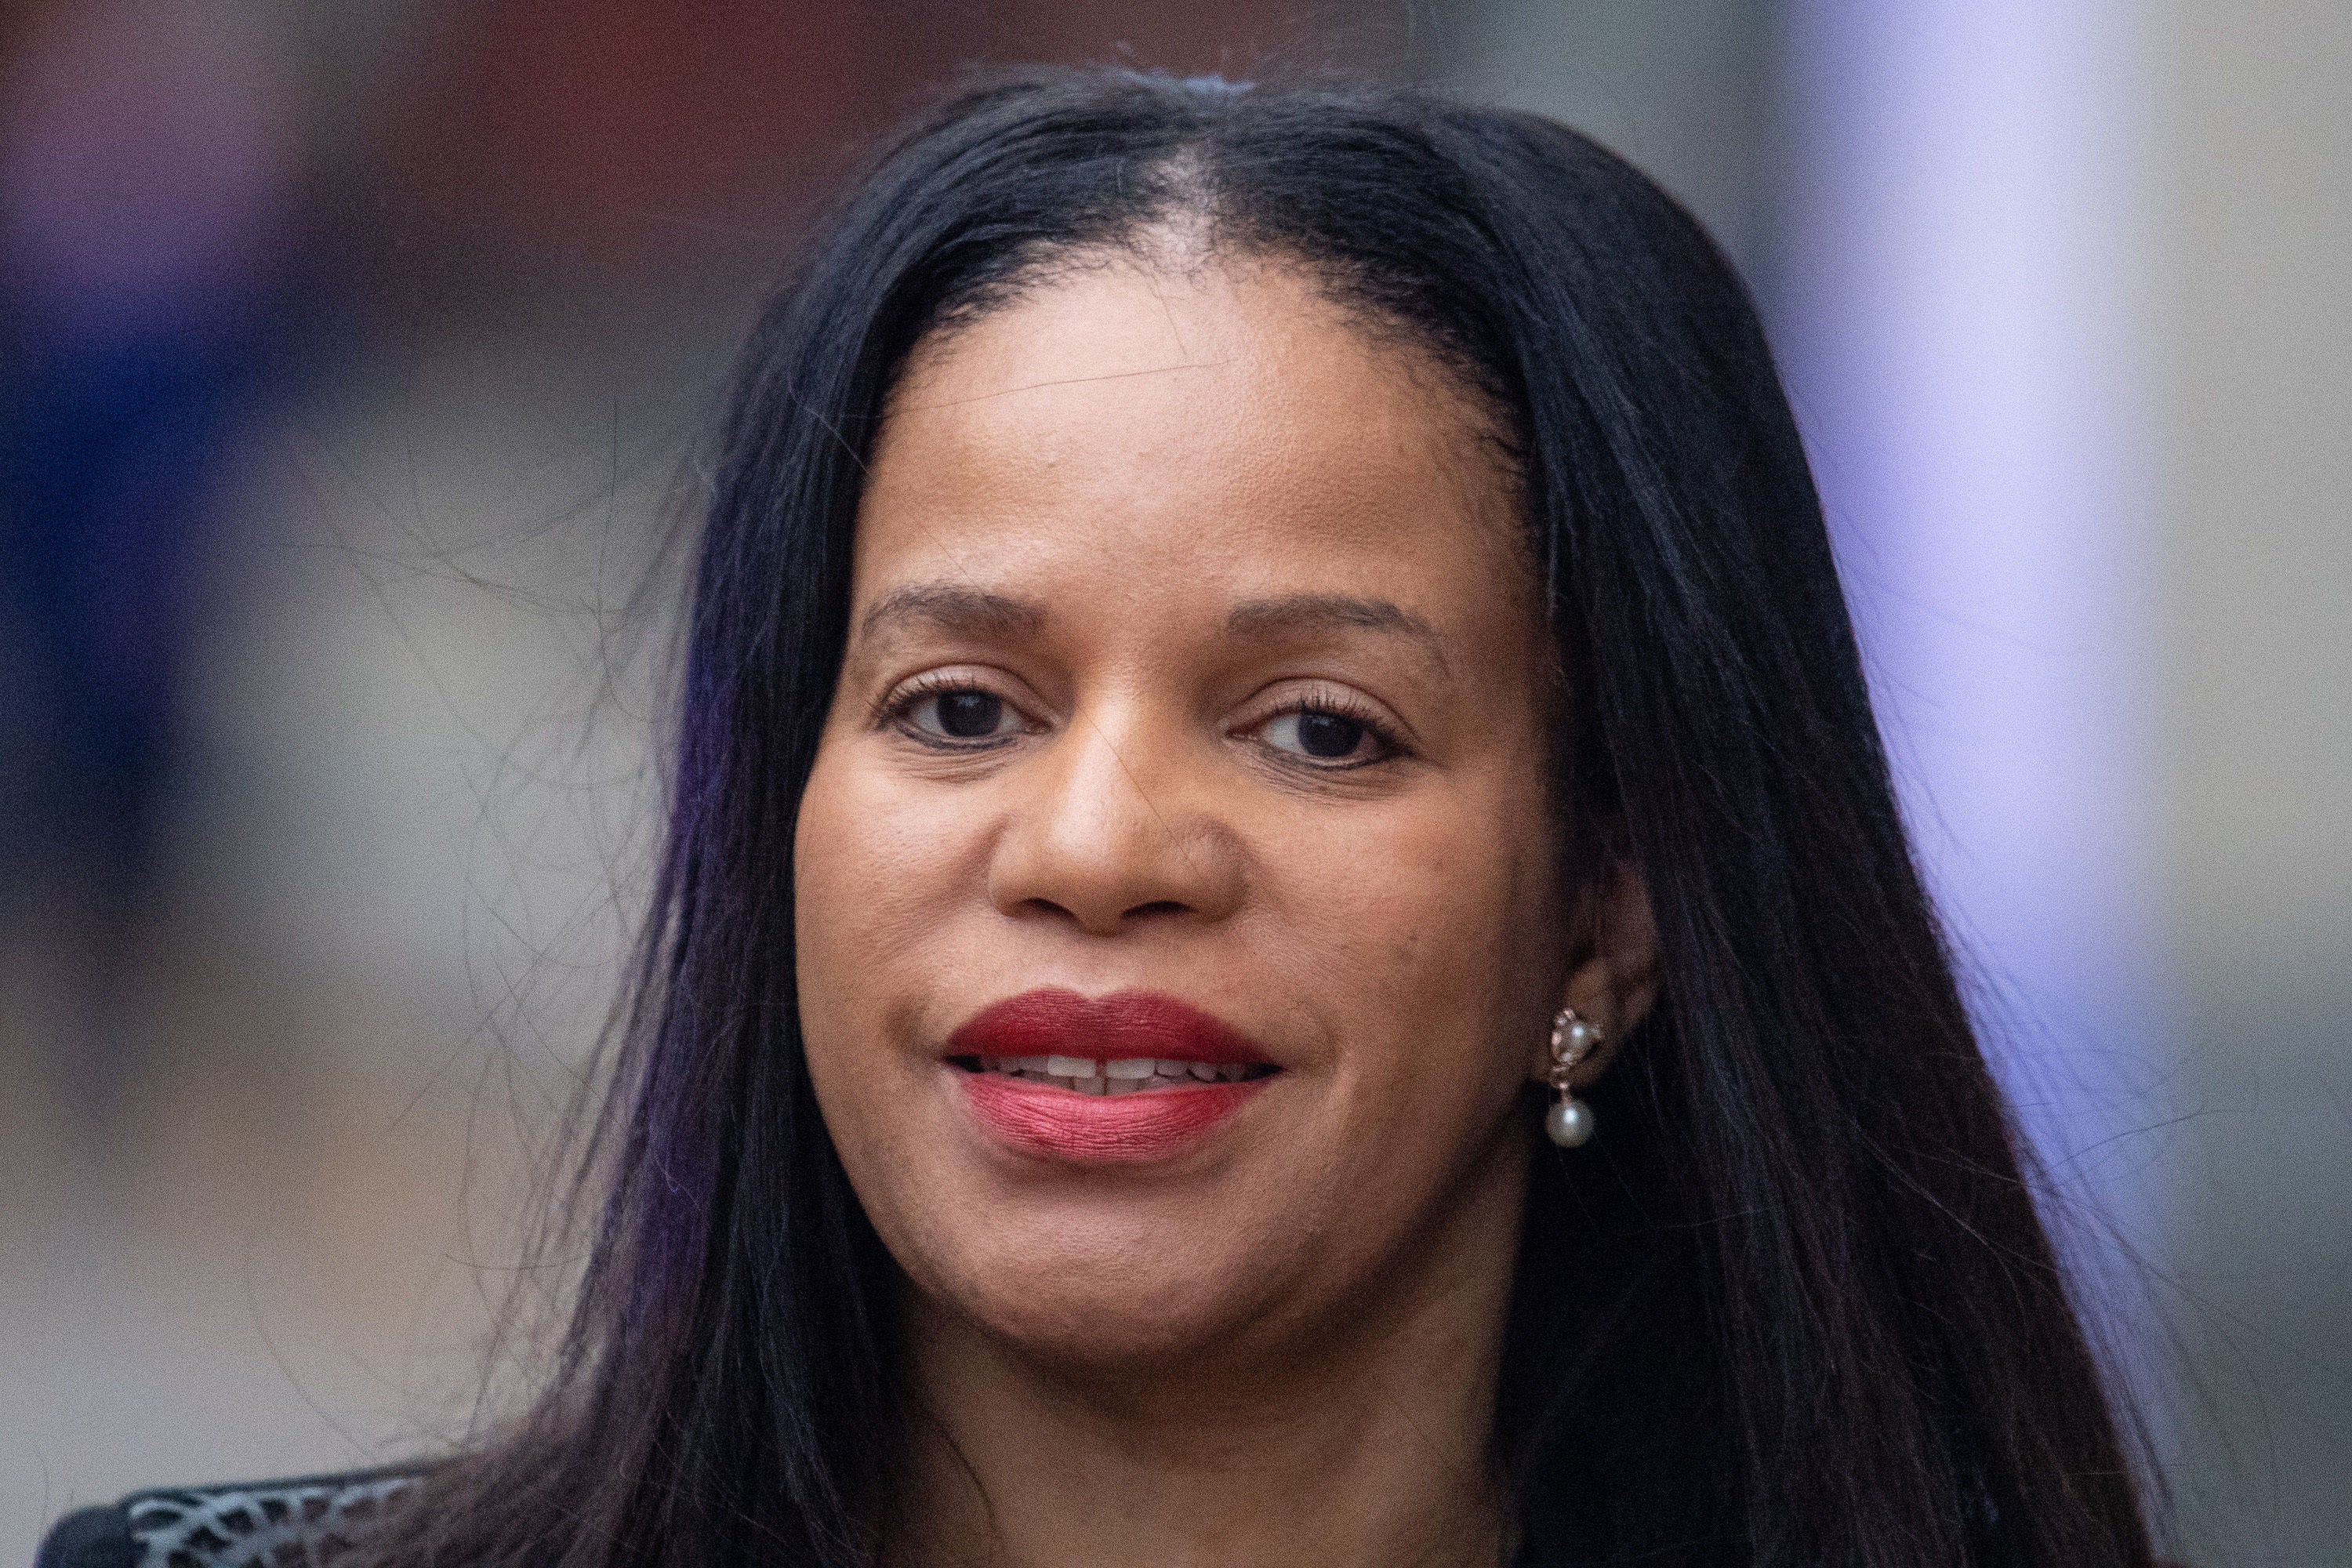 Claudia Webbe was elected to Commons in December 2019